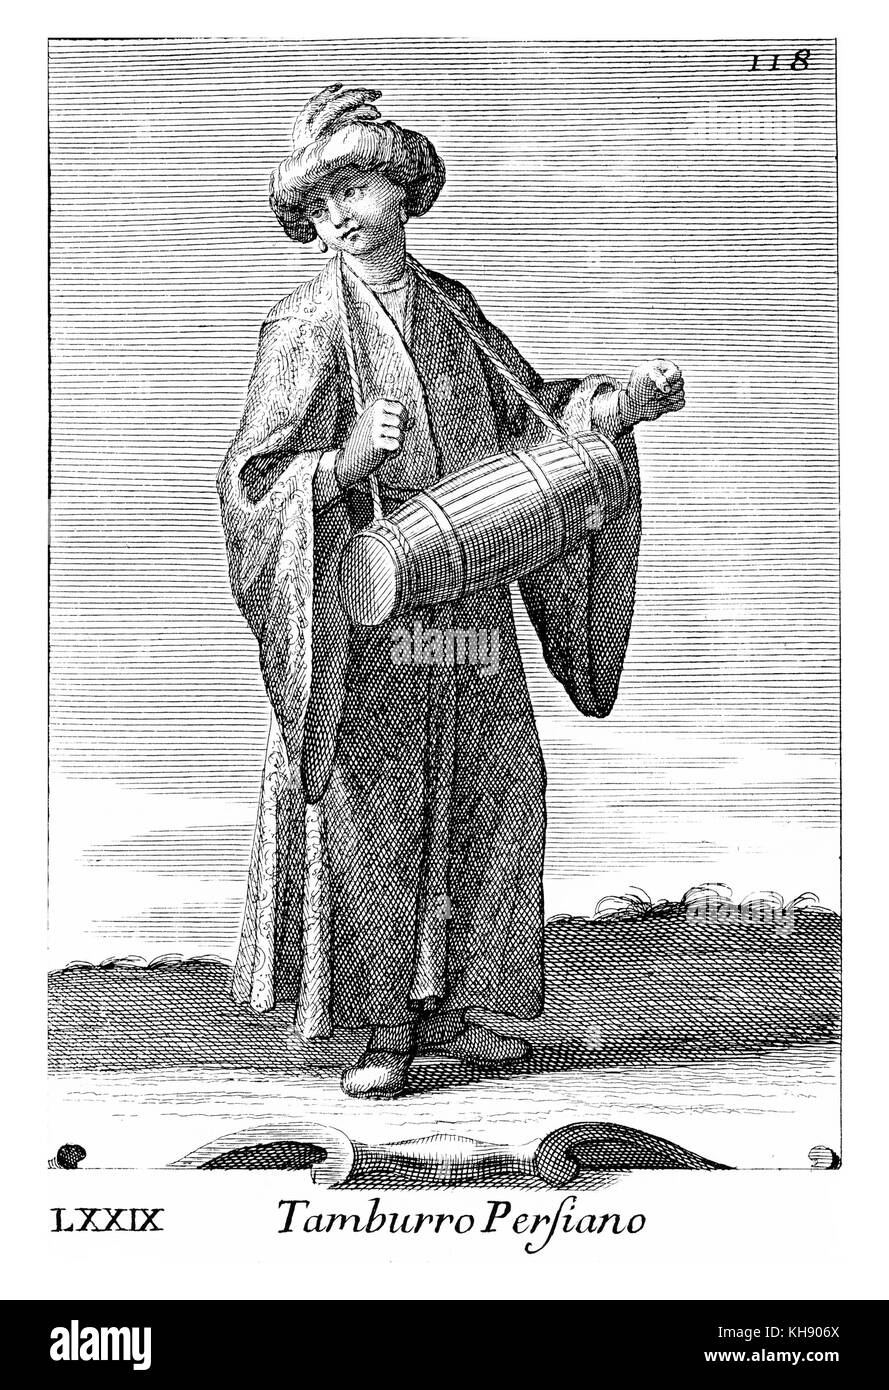 Man Playing small (Persian) barrel drum, played with the hands. Illustration from Filippo Bonanni's  'Gabinetto Armonico'  published in 1723, Illustration 79. Engraving by Arnold van Westerhout. Caption reads Tamburro Persiano. Stock Photo